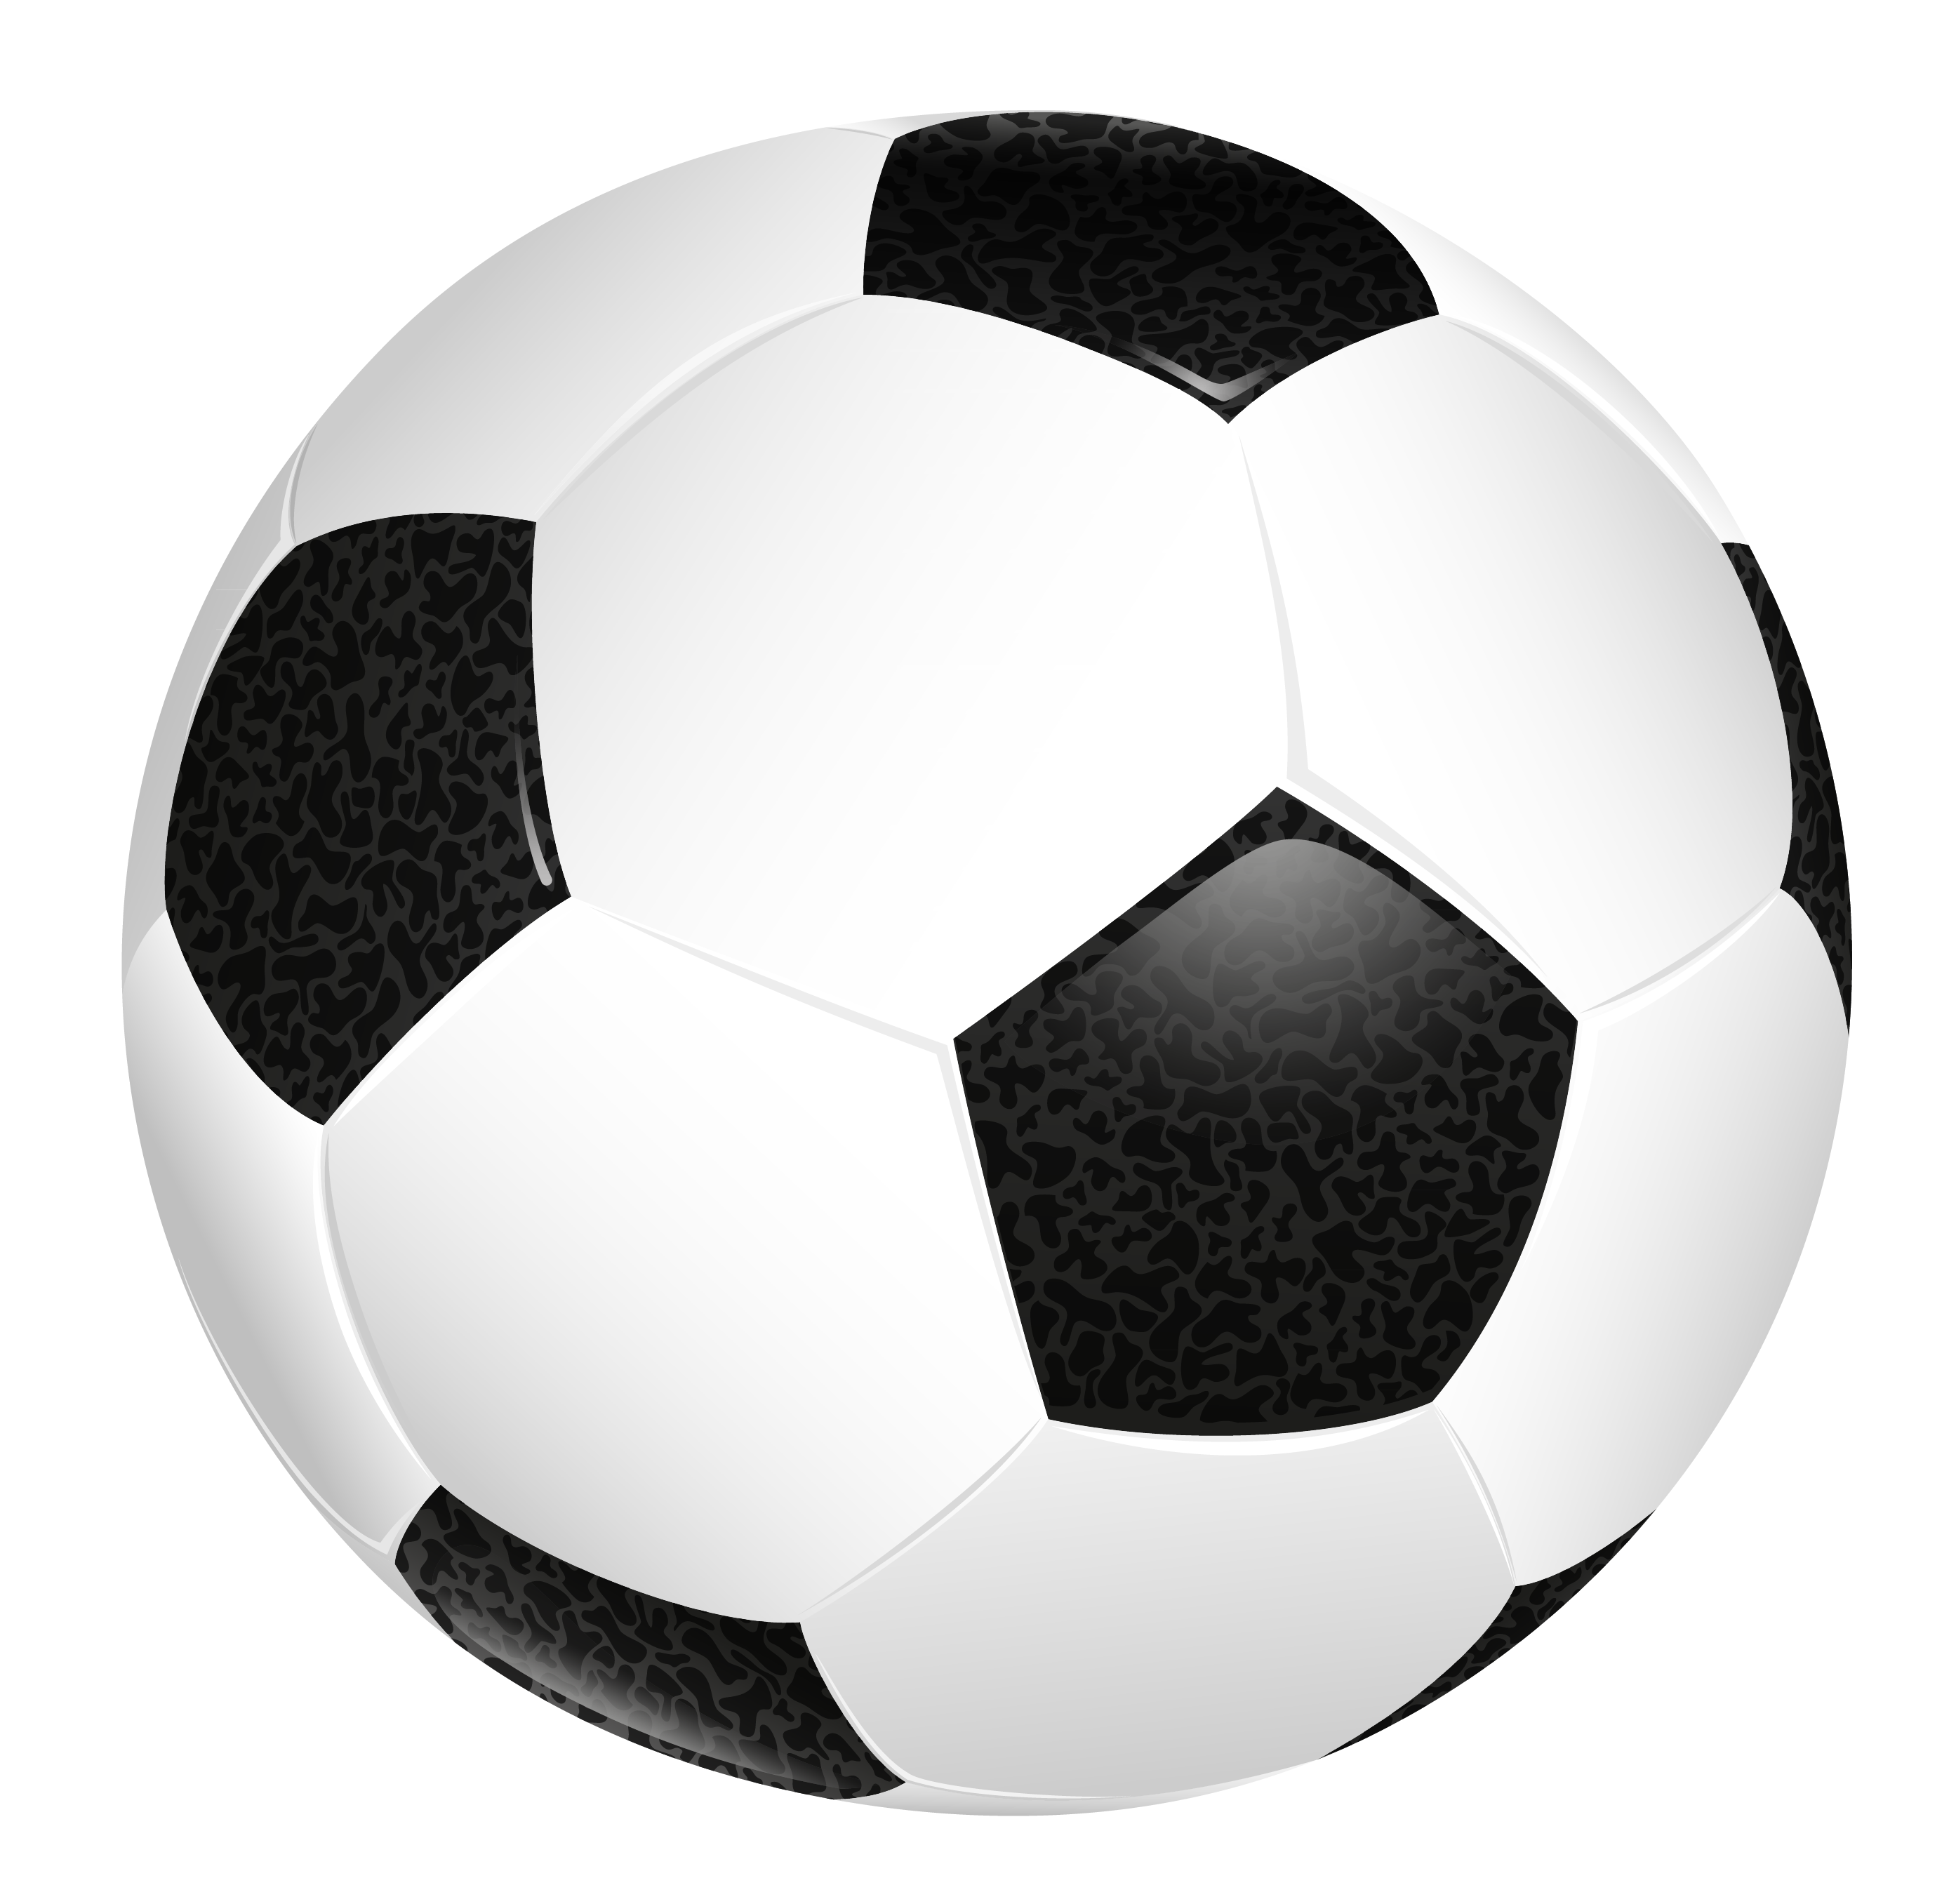 Soccer Ball Images Image Png Clipart